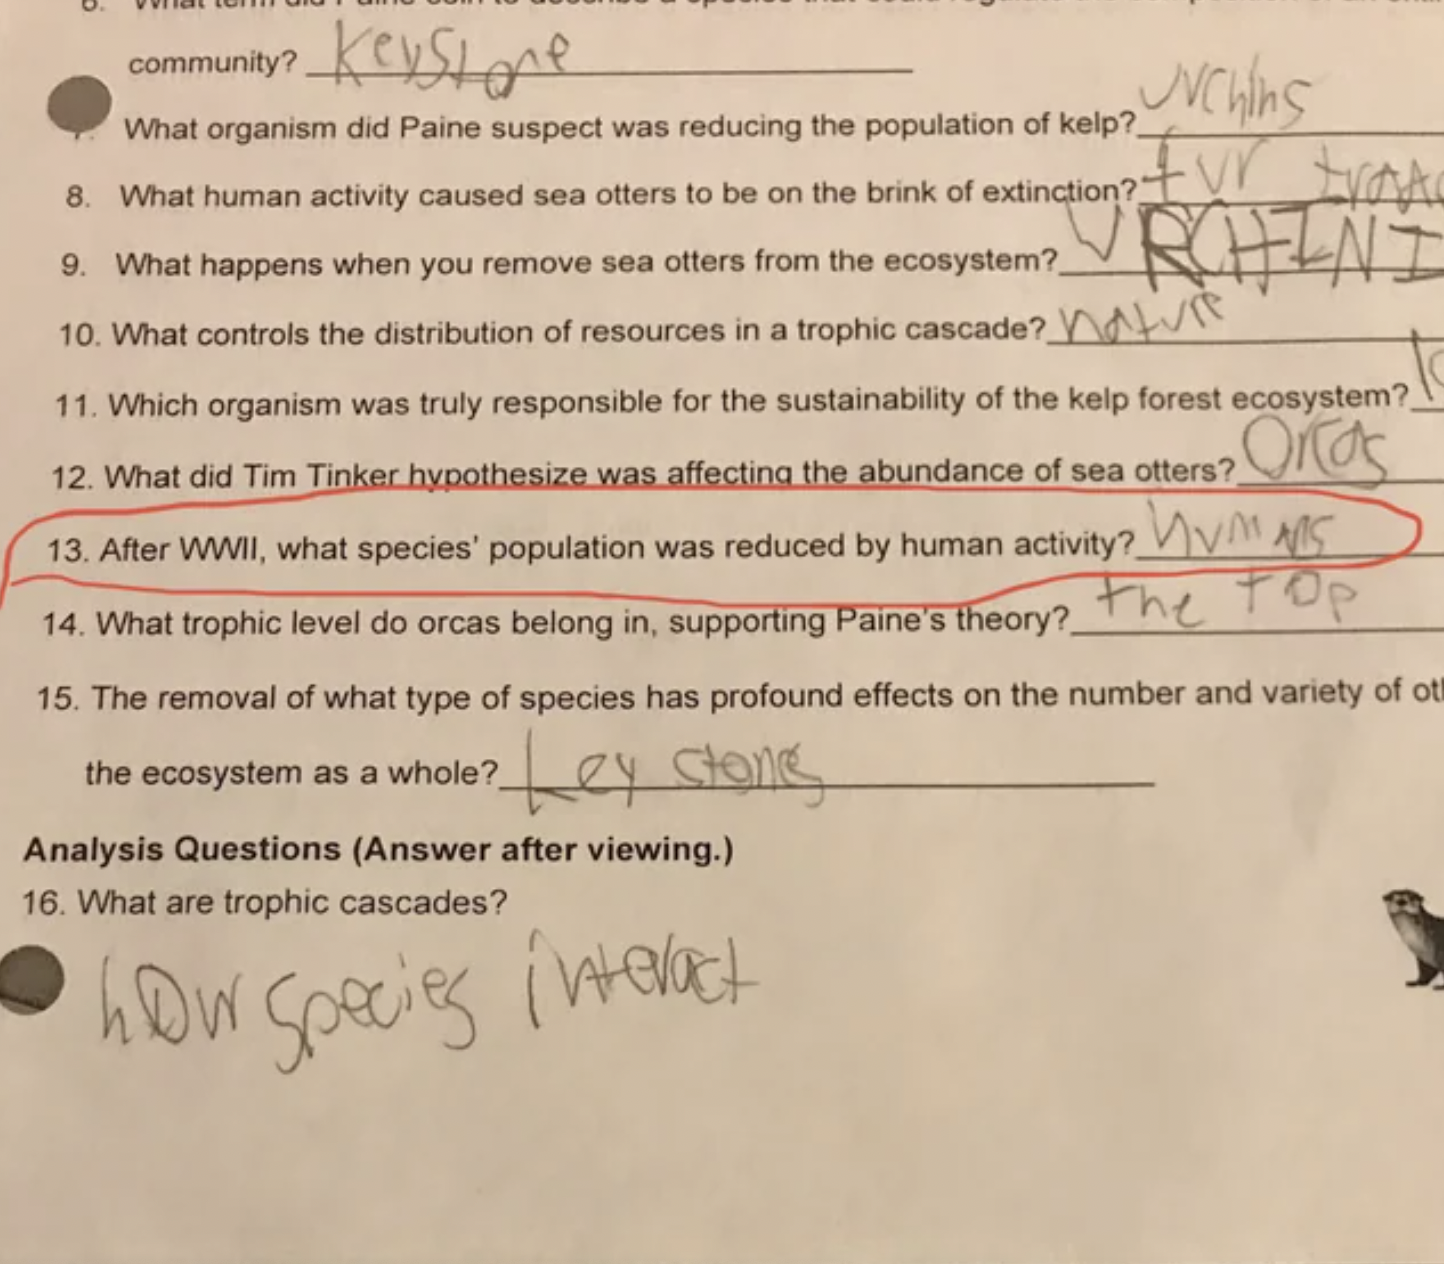 funny facepalms - handwriting - Keystone What organism did Paine suspect was reducing the population of kelp? 8. What human activity caused sea otters to be on the brink of extinction?